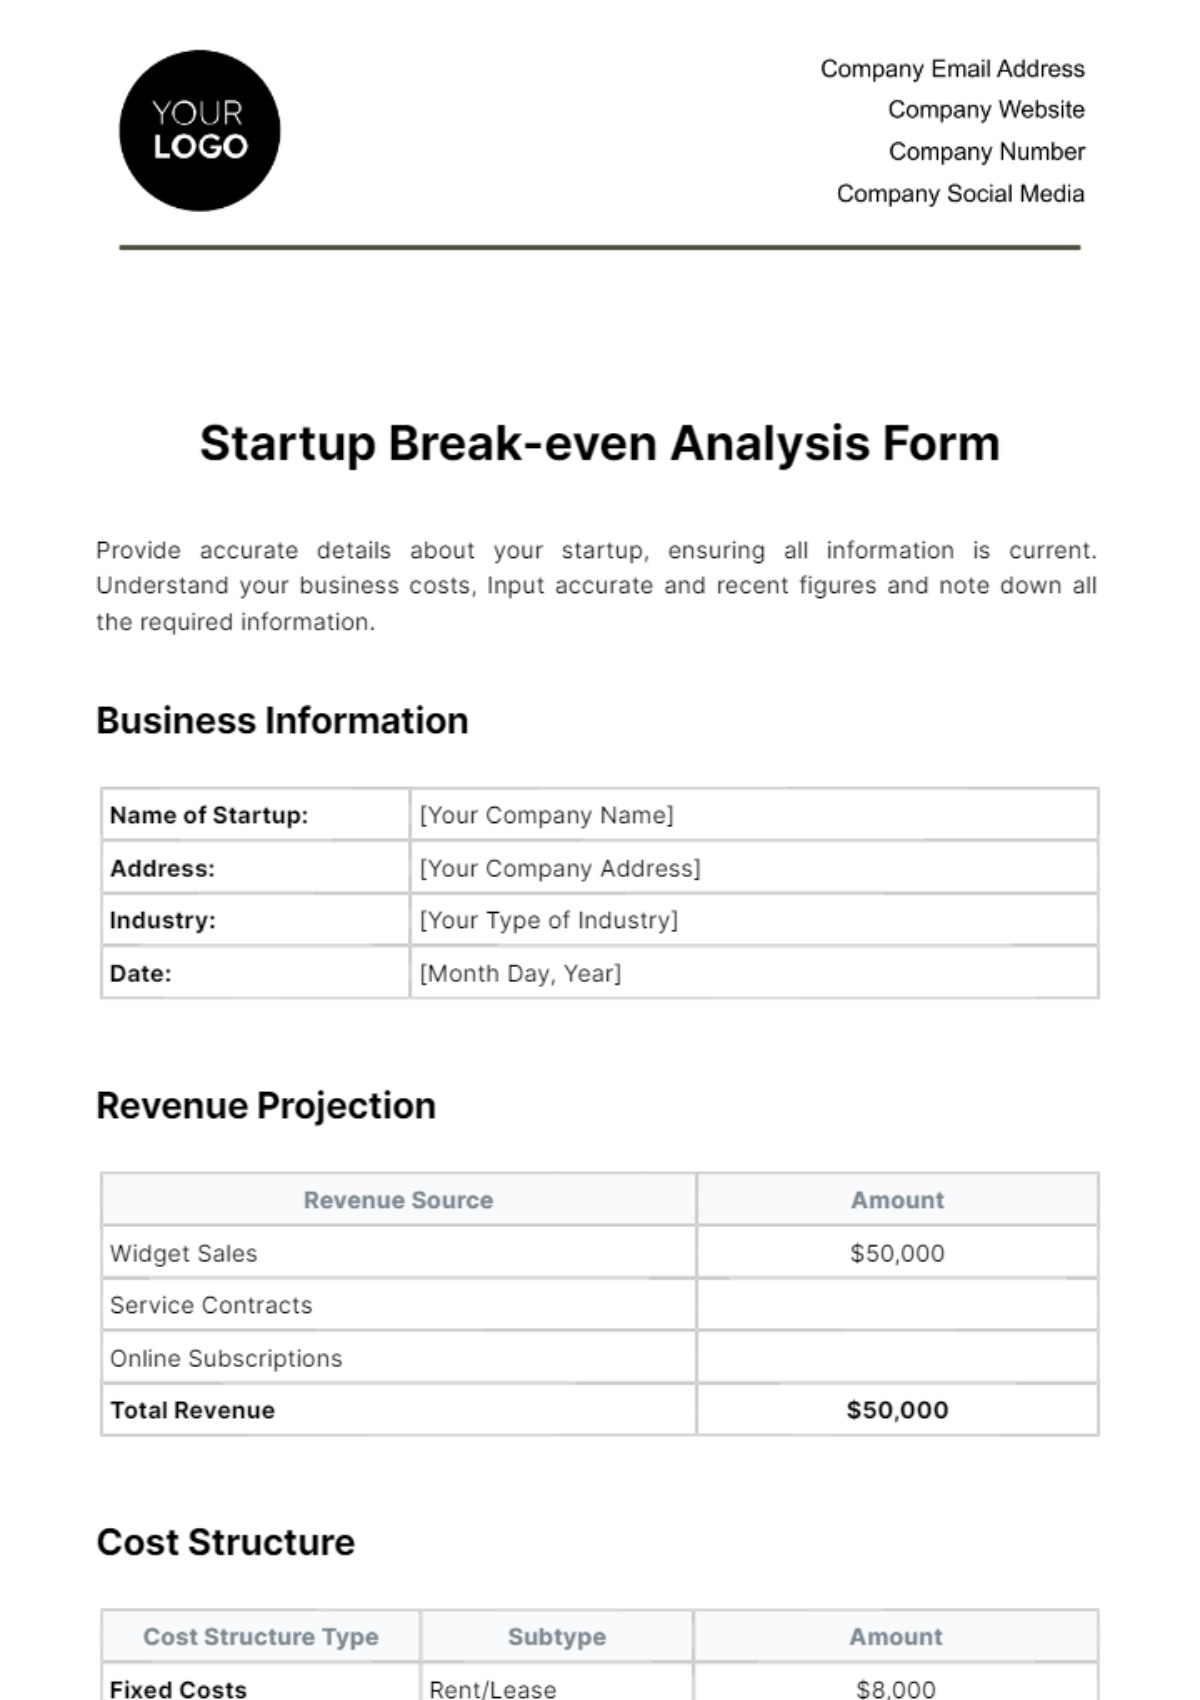 Free Startup Break-even Analysis Form Template